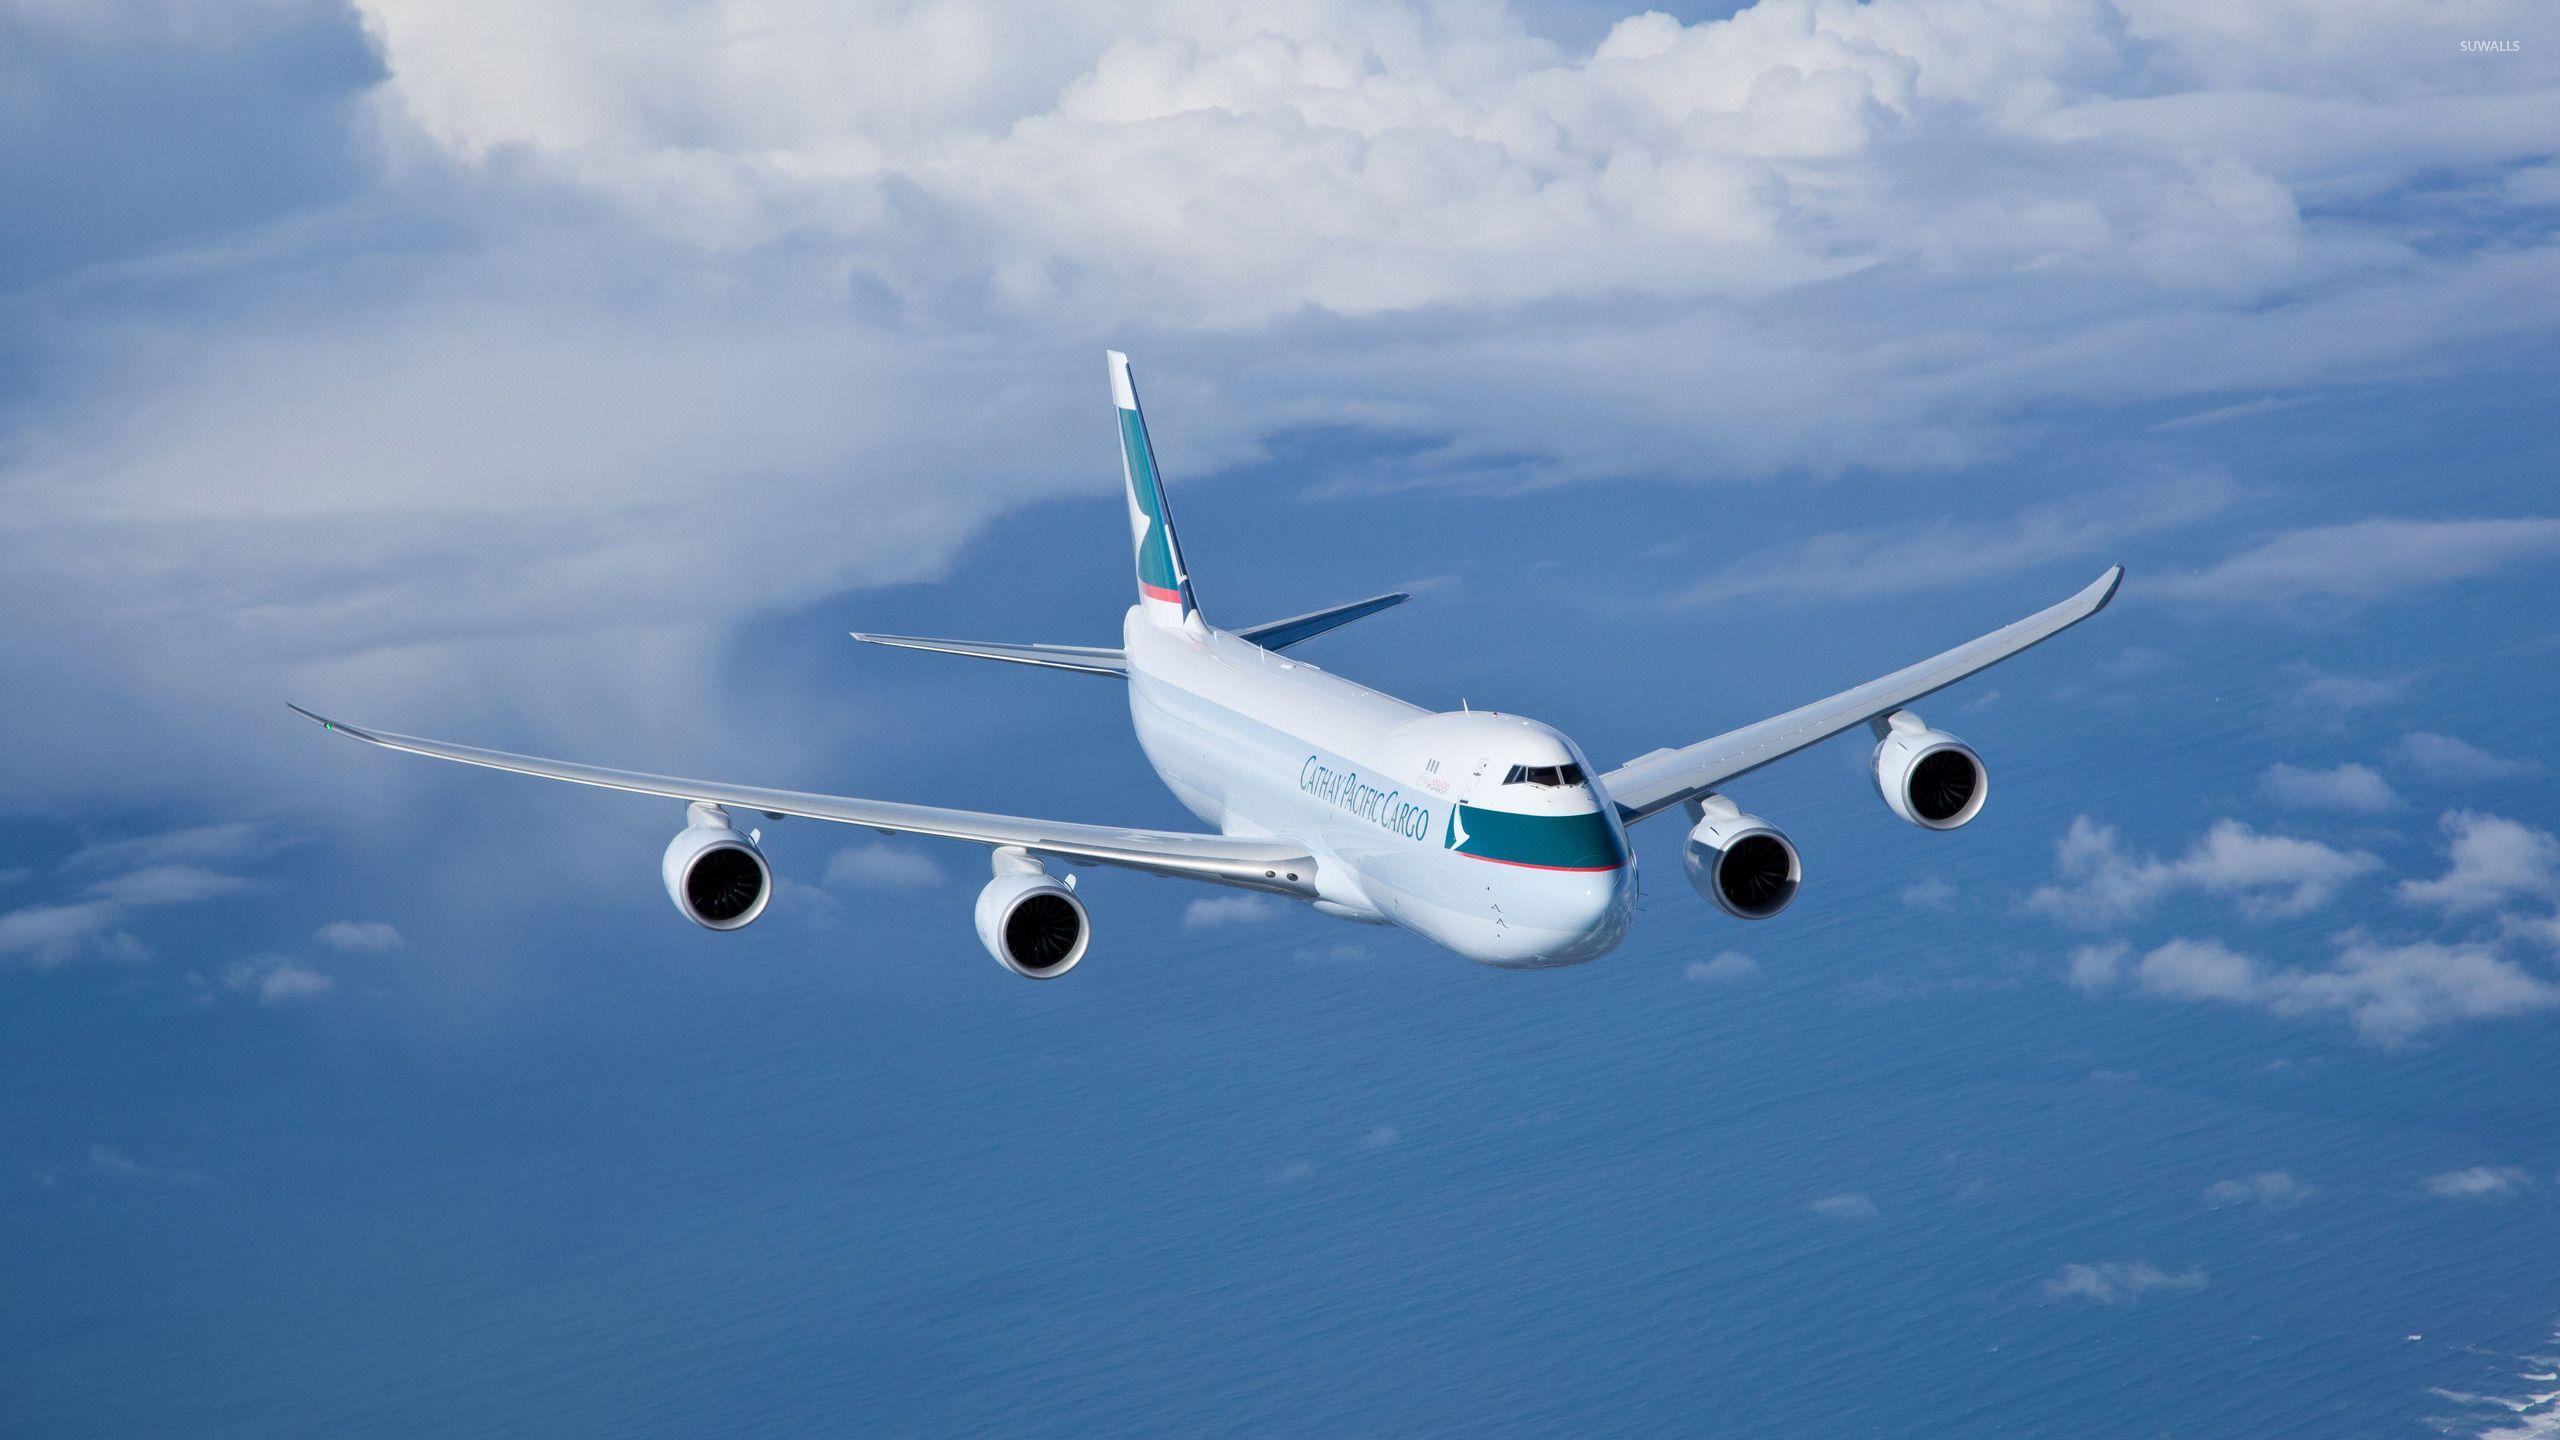 Cathay Pacific Cargo Boeing 747 wallpaper wallpaper